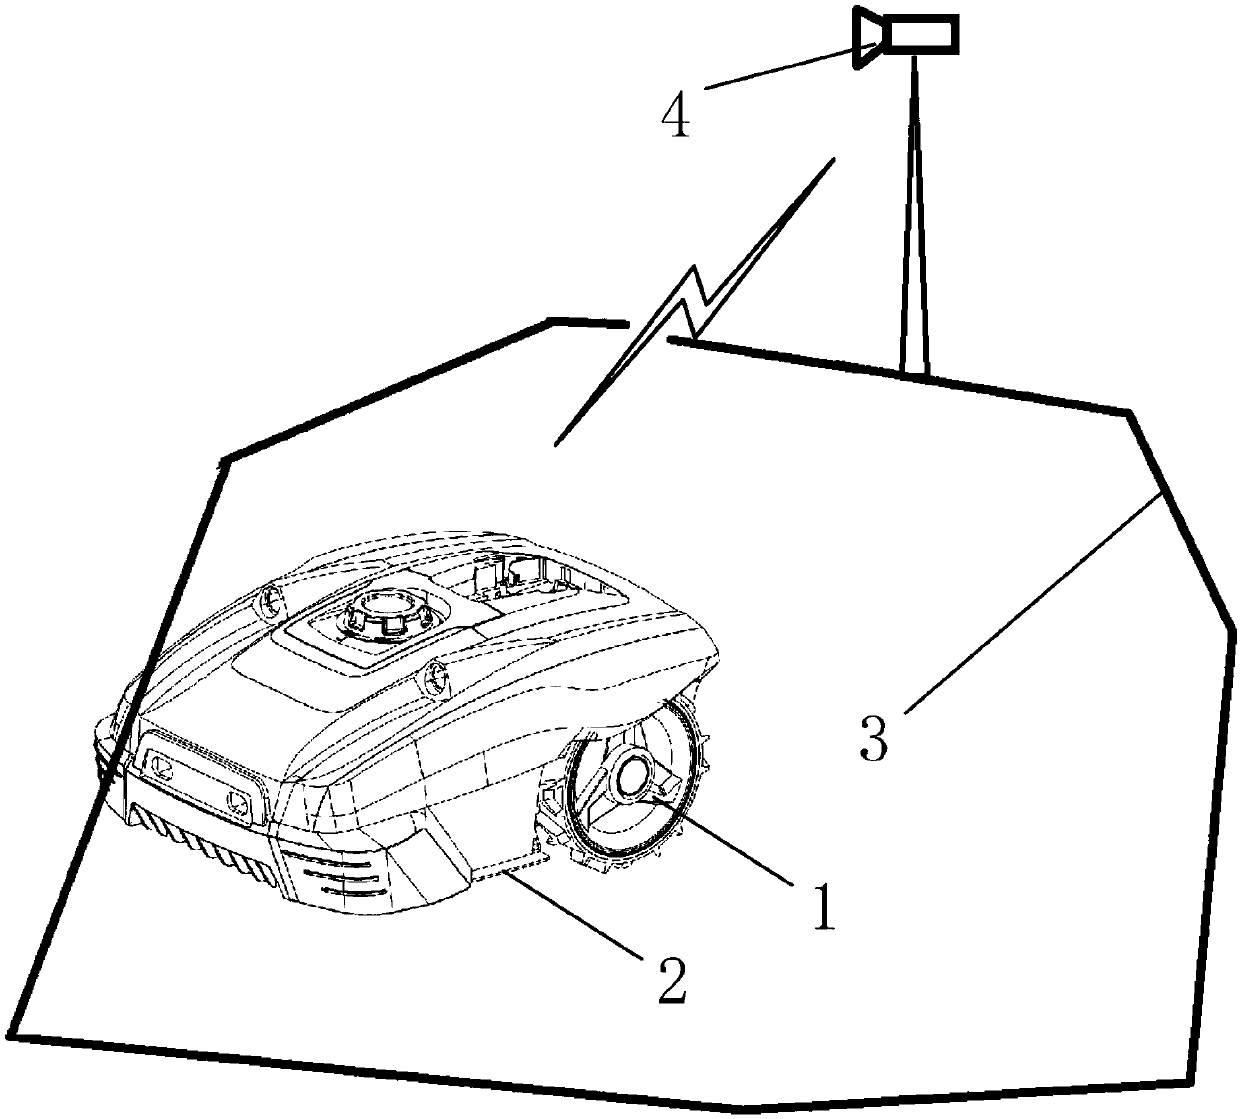 An out-of-bound judgment method and system for a mobile robot